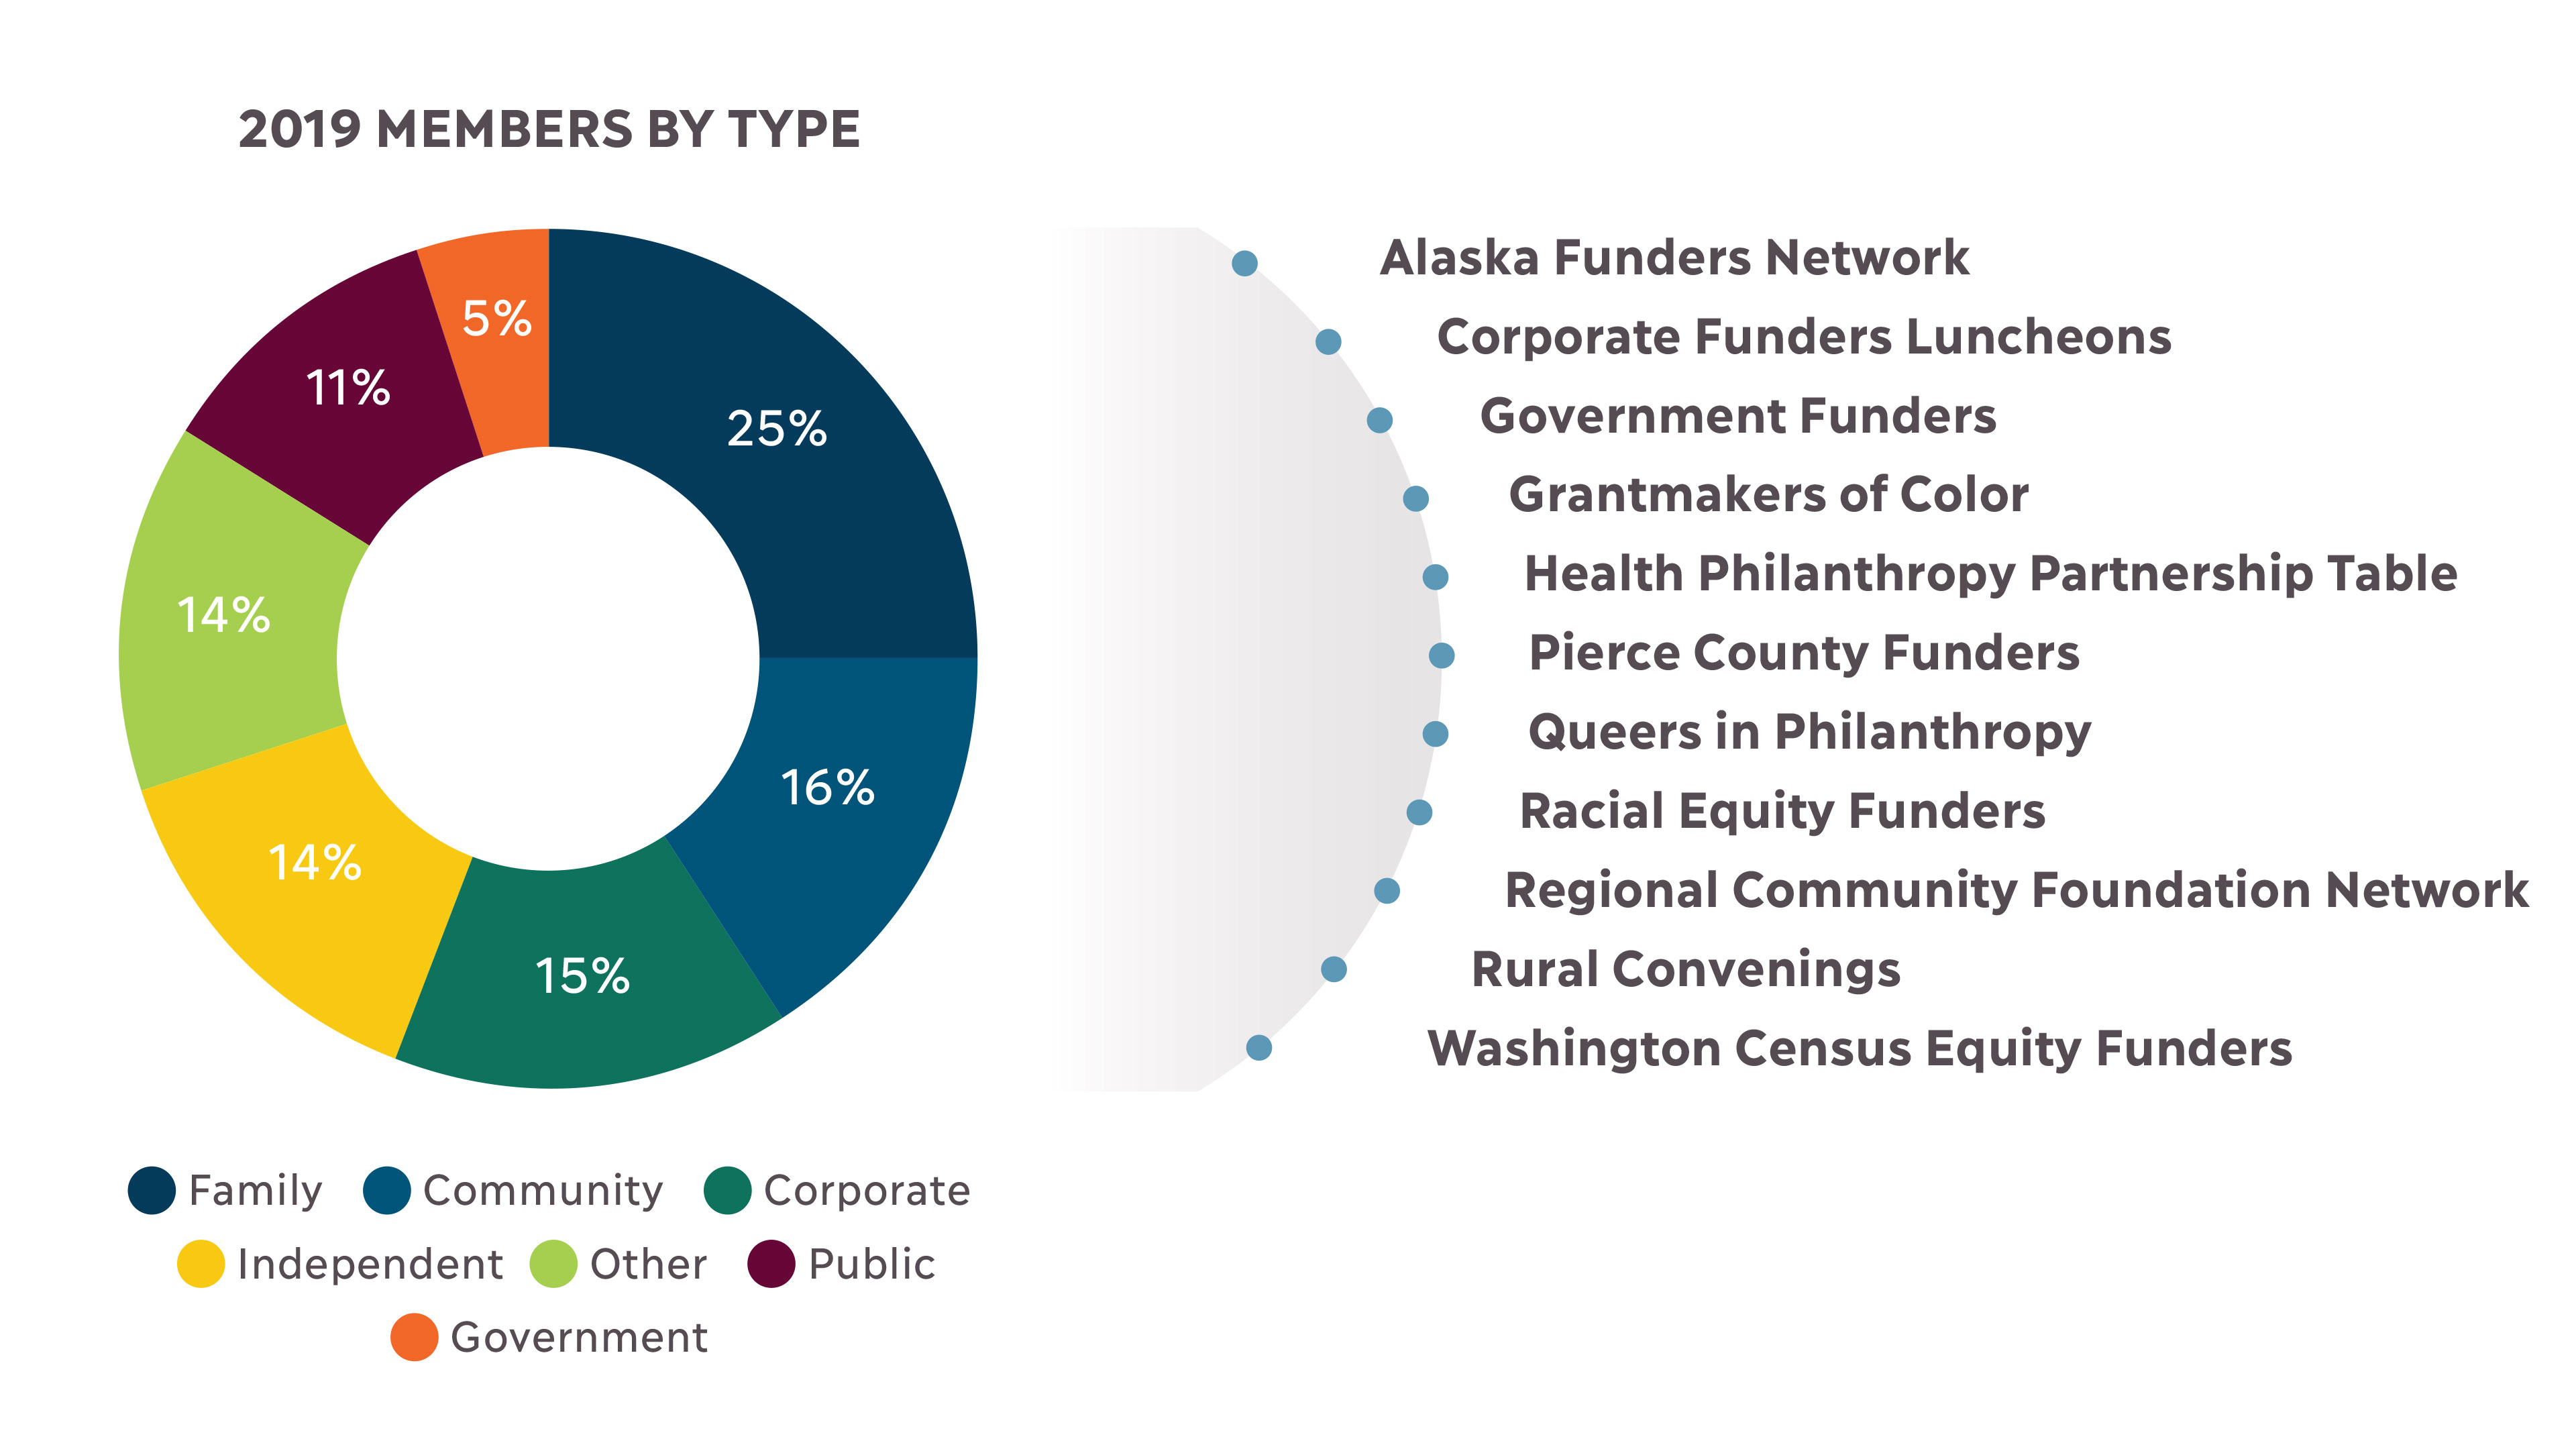 A donut graph of PNW 2019 members by type showing 25% Family foundations; 16% Community foundations; 15% Corporate foundations; 14% Independent foundations; 14% Other; 11% Public; 5% Government